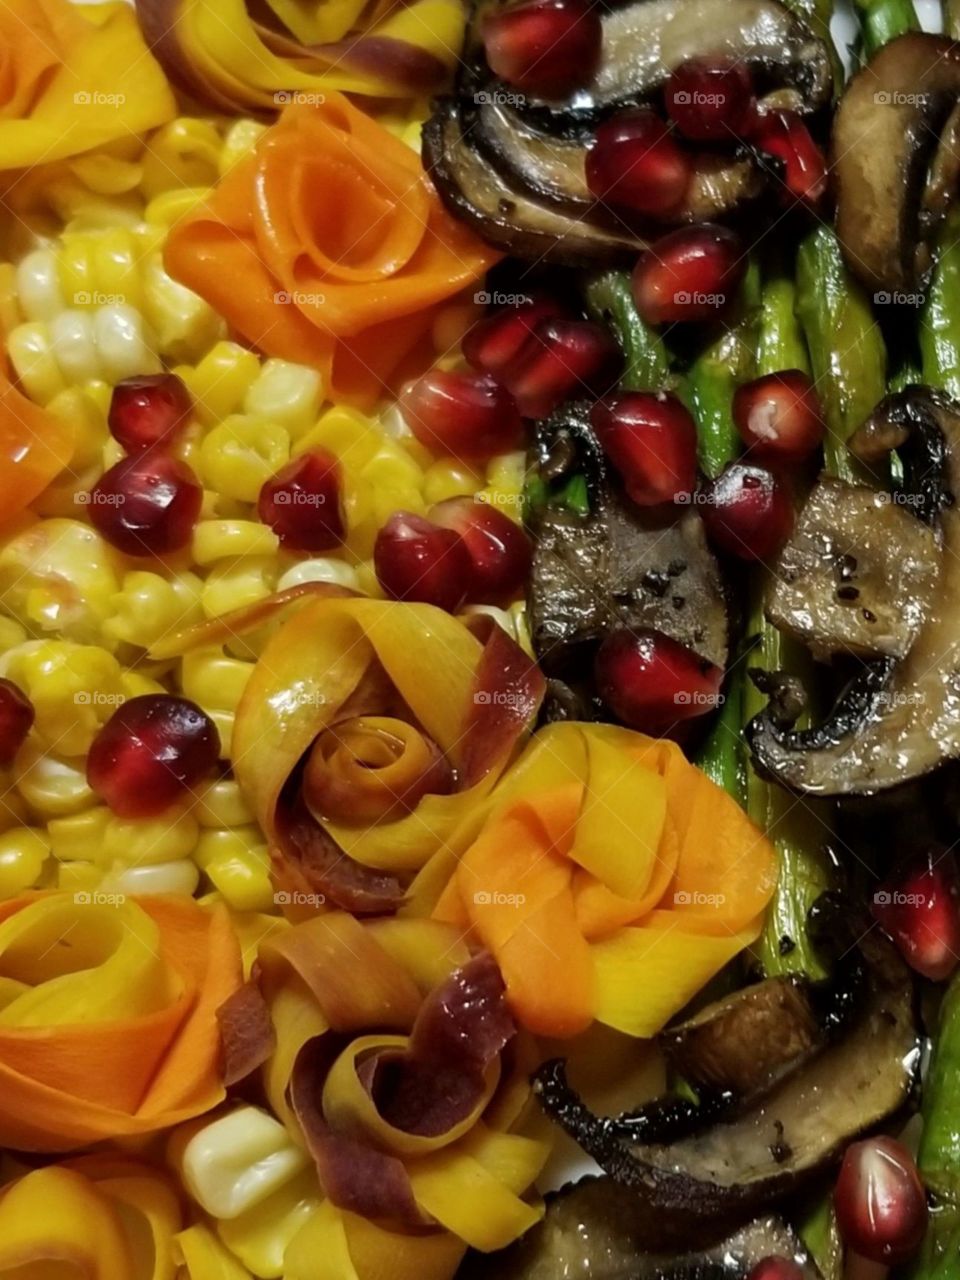 The spectacular jewel tones of the Autumn harvest are celebrated in this delicious plate. The folded roses and flowers in the fall tones are made with multi color carrot ribbons. Corn and pomegranate arils are a reflection of the colors of the fall sugar maple foliage.